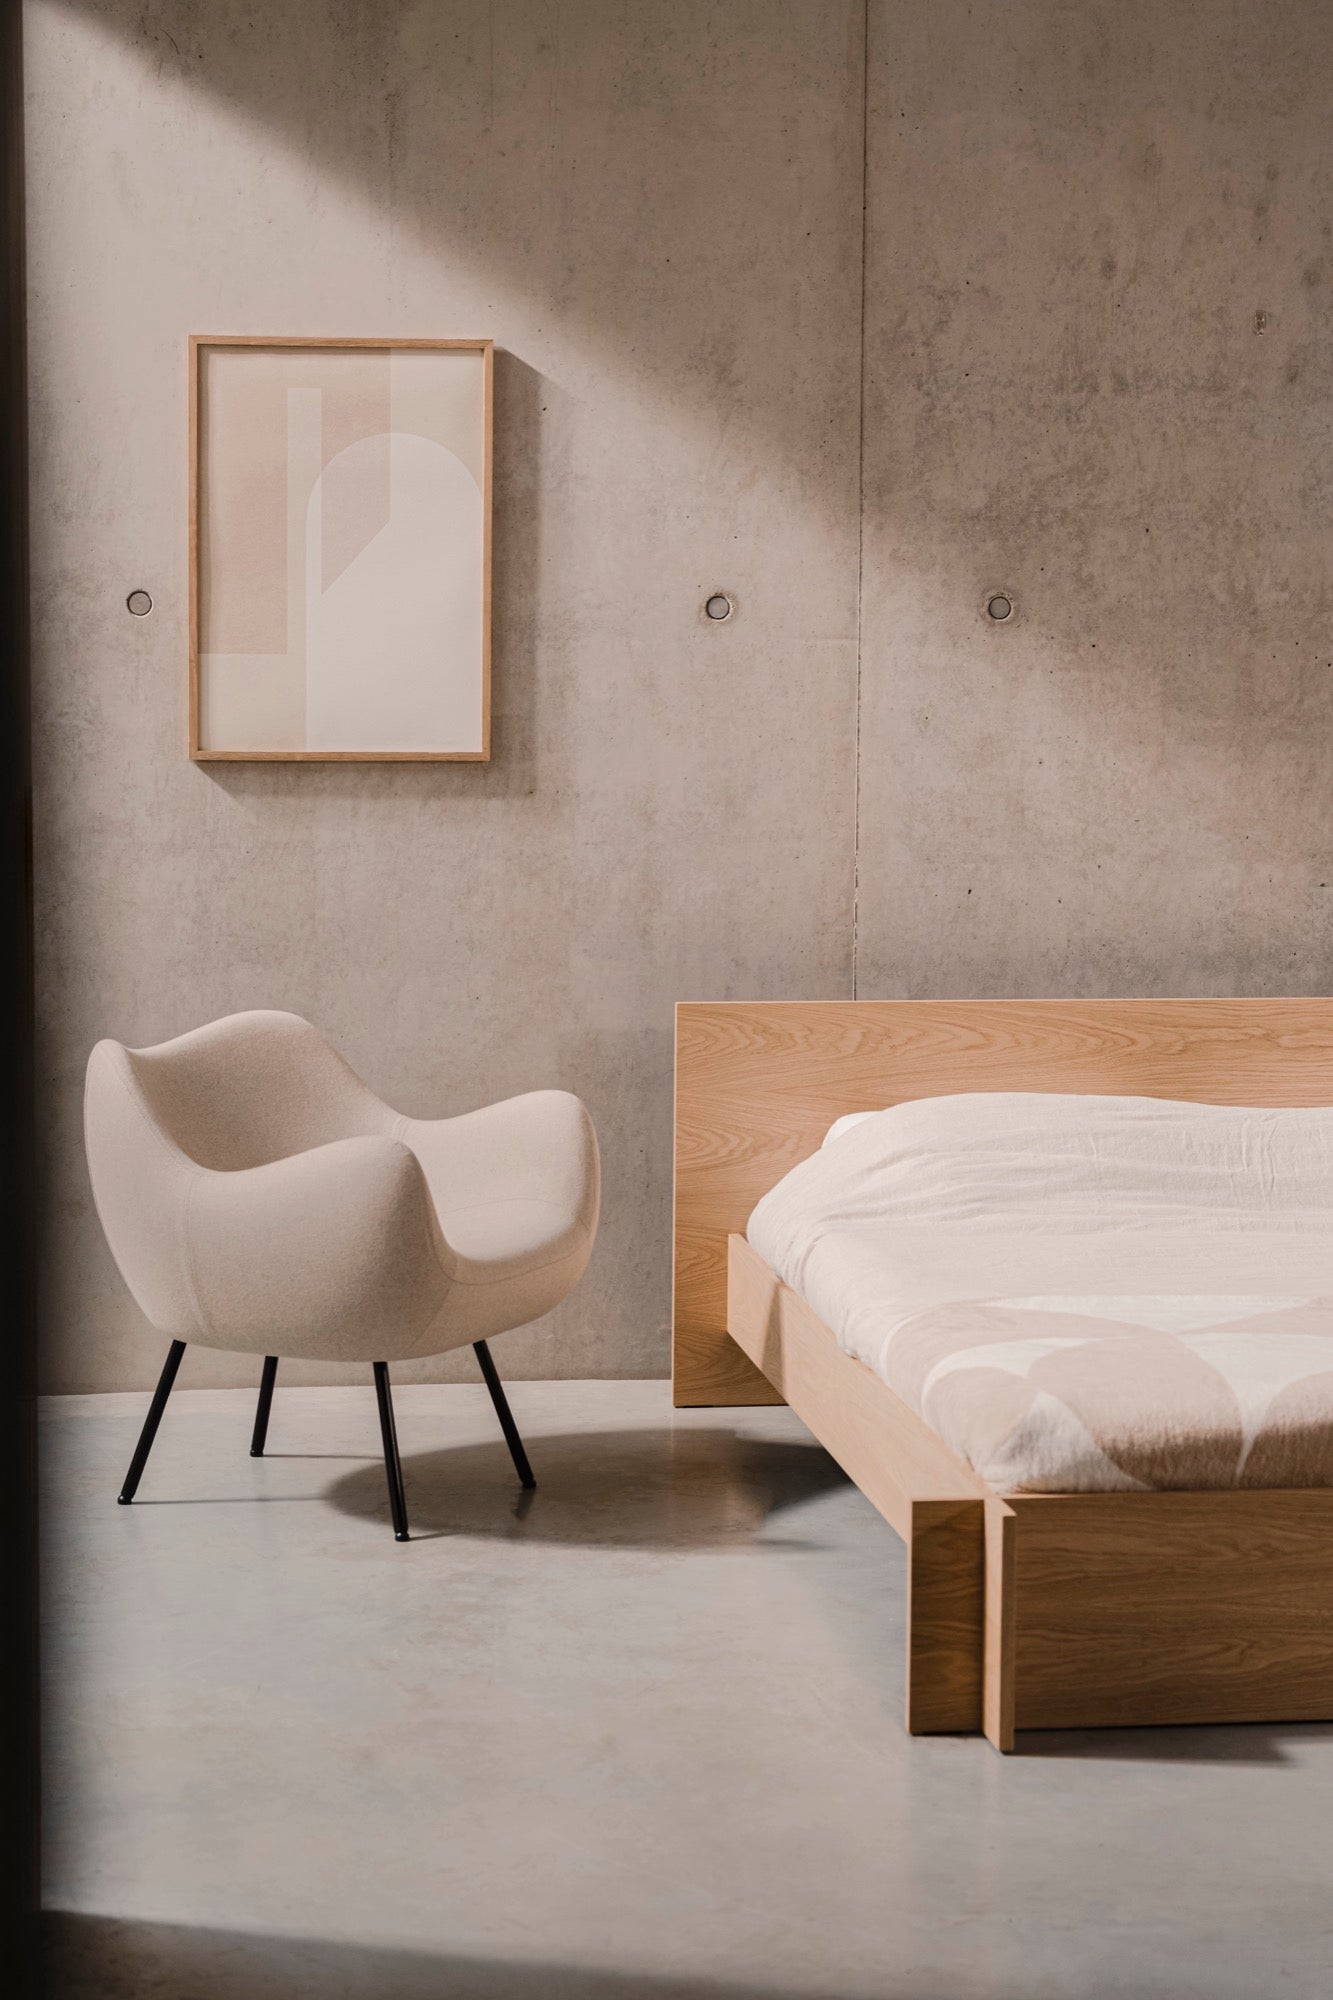 Sleep in style with our modern bedroom furniture designed to elevate your space and enhance your rest. Get inspired by cozy and aesthetic bedroom ideas featuring beds with headboards, bedside tables, benches, ambient lighting, and more.